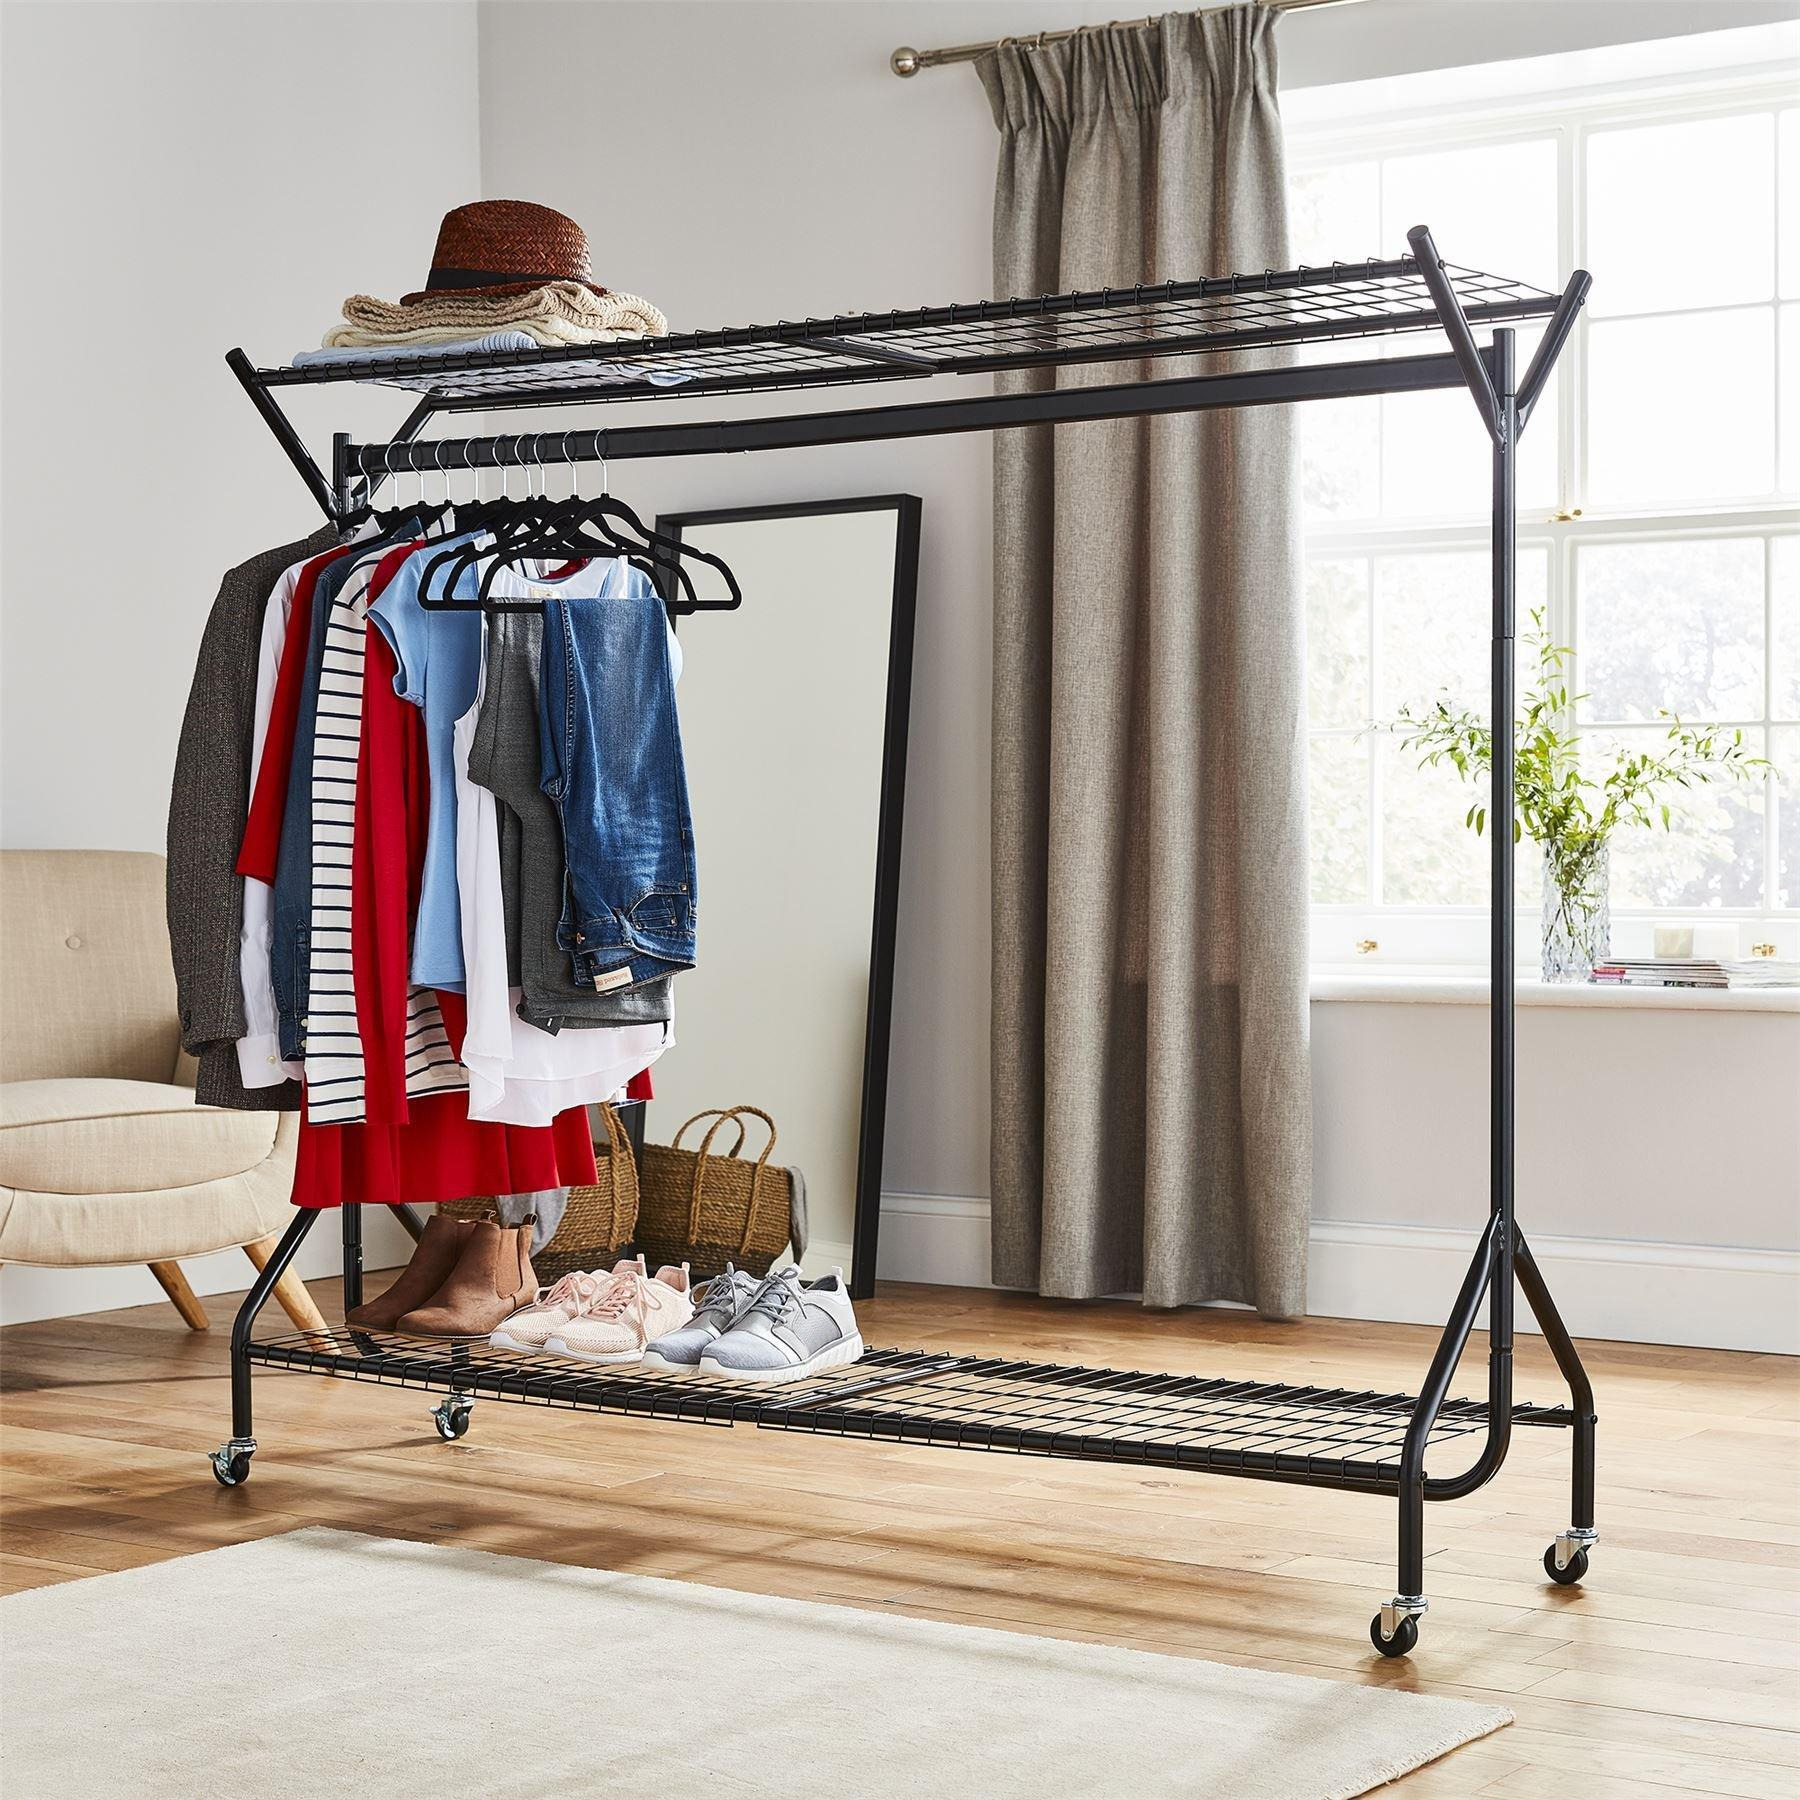 Clothing Rail Heavy Duty Hanging Clothes Shoe Hat Rack Shelves With Wheels 6ft x 5ft - image 1